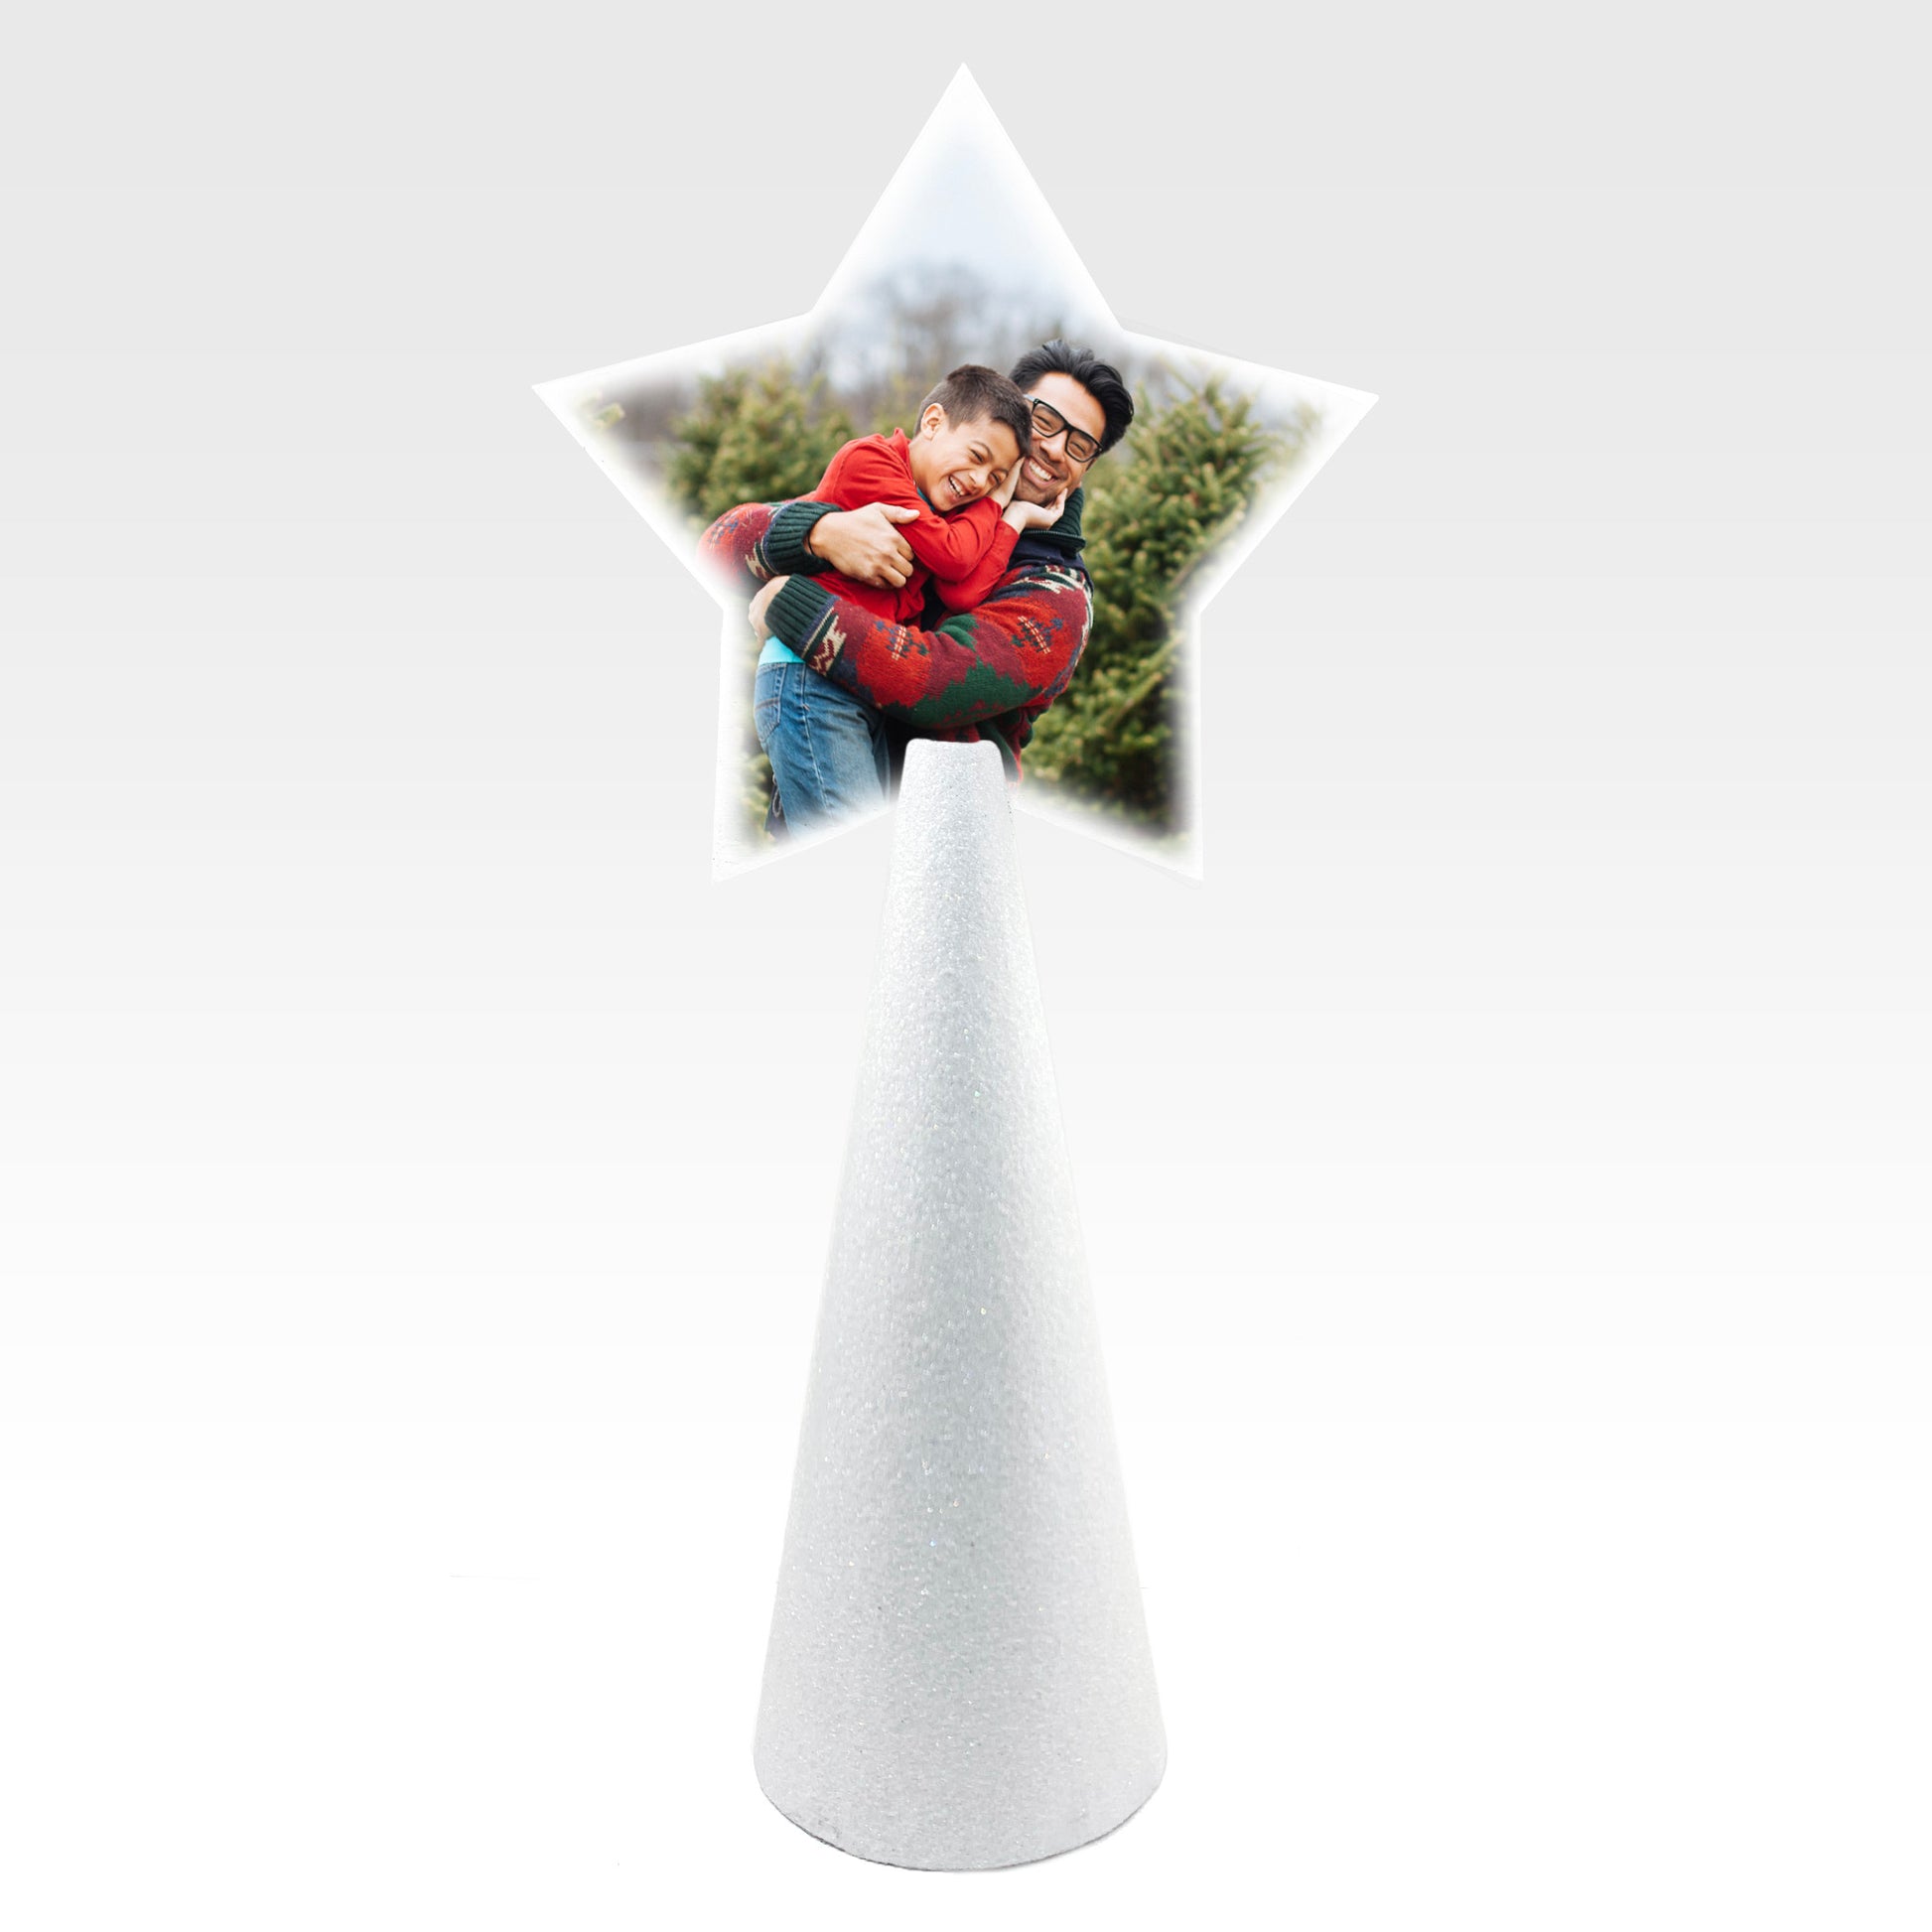 Custom tree topper - White Star with sample dad & boy photo - white pearl glitter cone